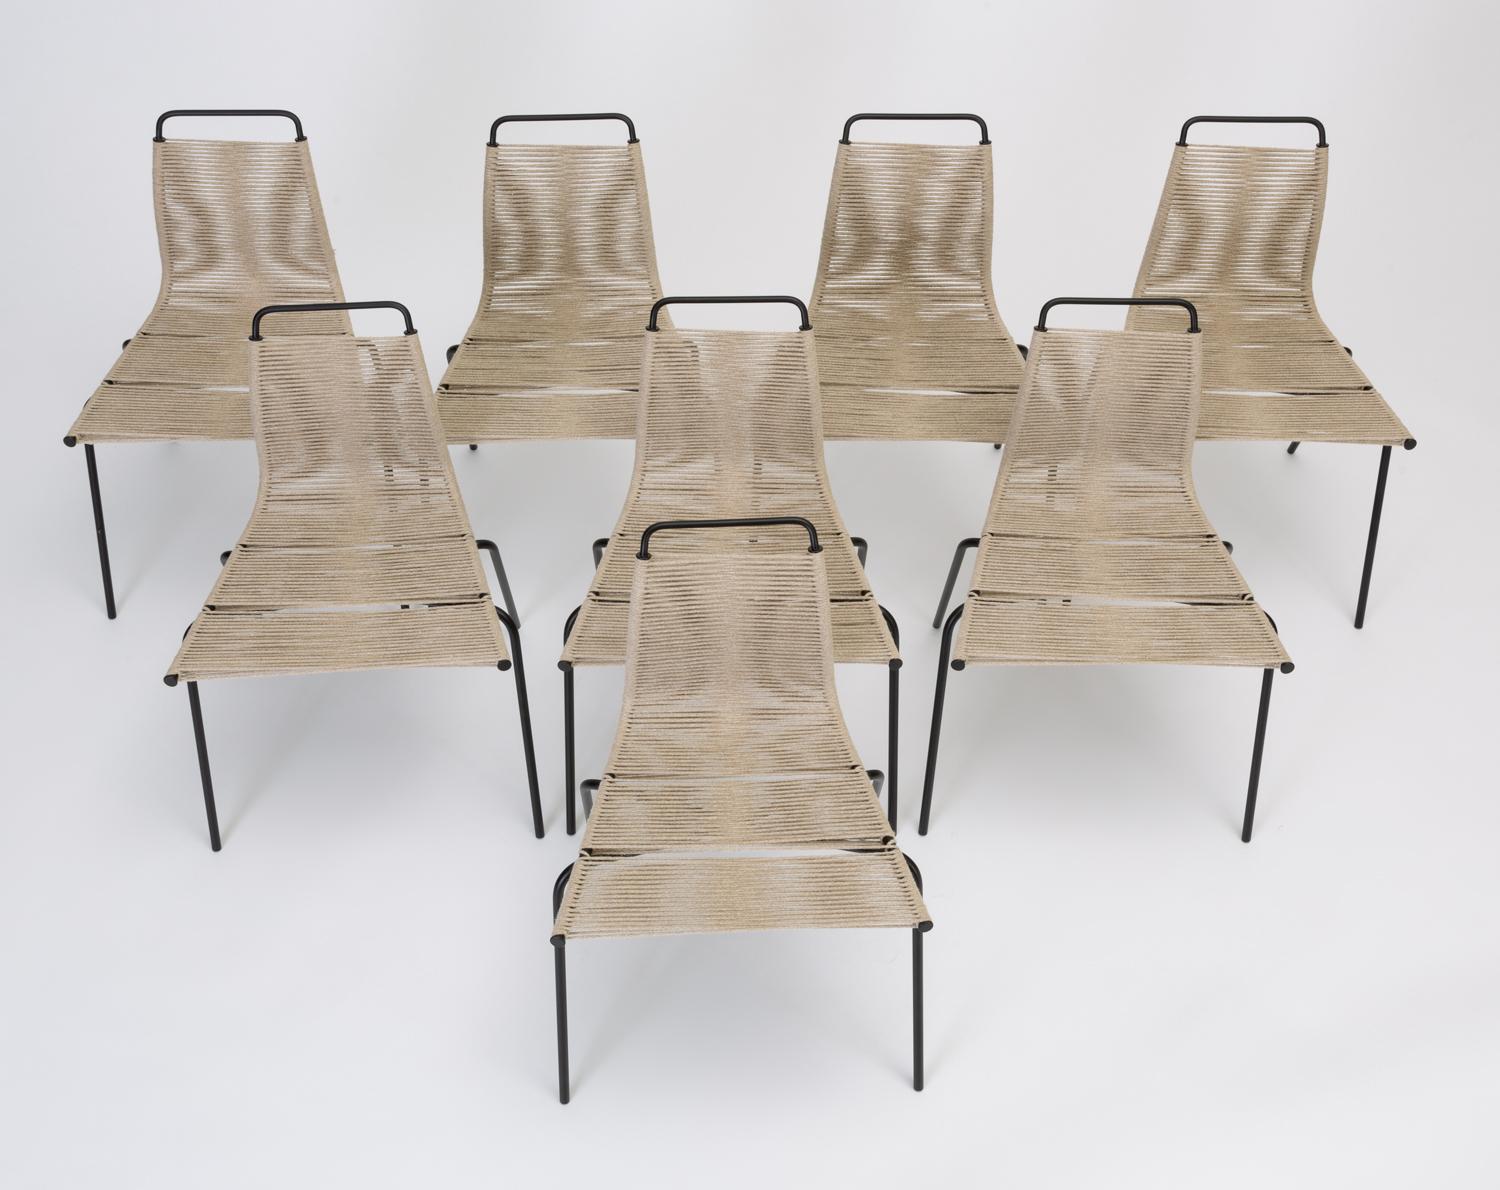 A set of eight dining chairs designed by Poul Kjærholm for E. Kold Christensen in 1955. Originally, the series PK-1, -2, and -3 referenced a complete line of steel-frame chairs with the seat material indicated by the model number (1 is done in